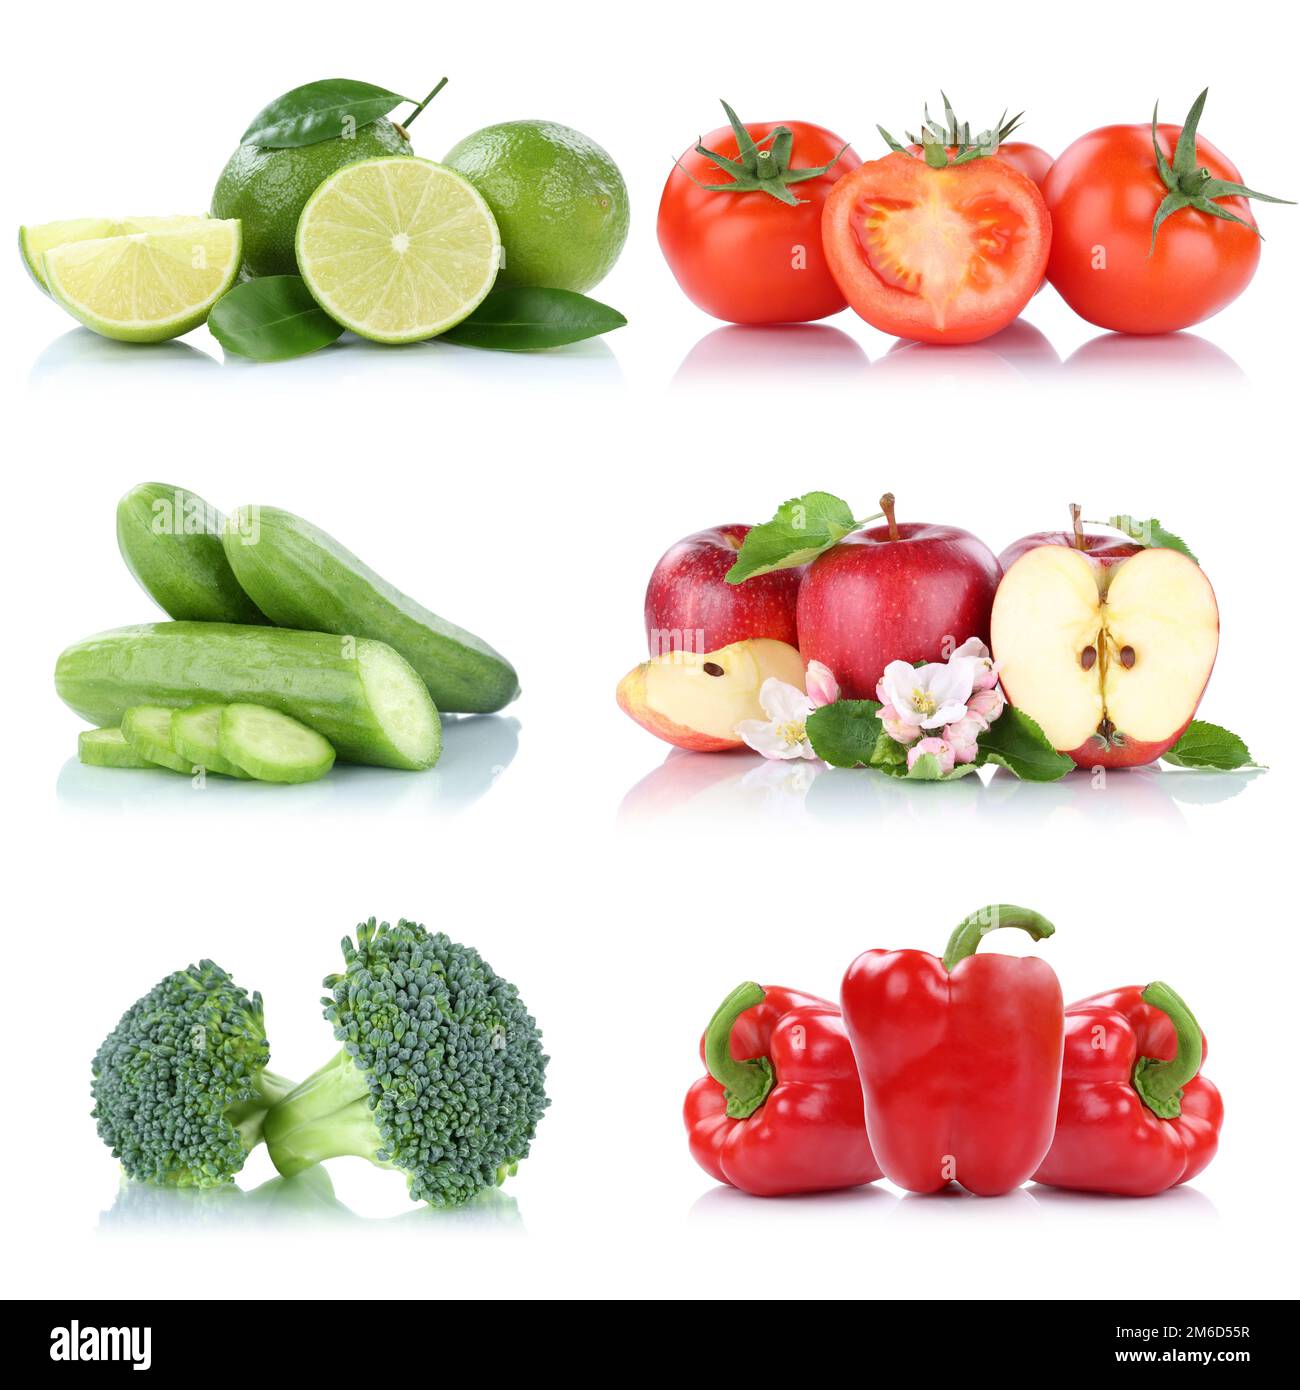 Fruits vegetables collection isolated apple apples tomatoes bell pepper colors fresh fruit Stock Photo